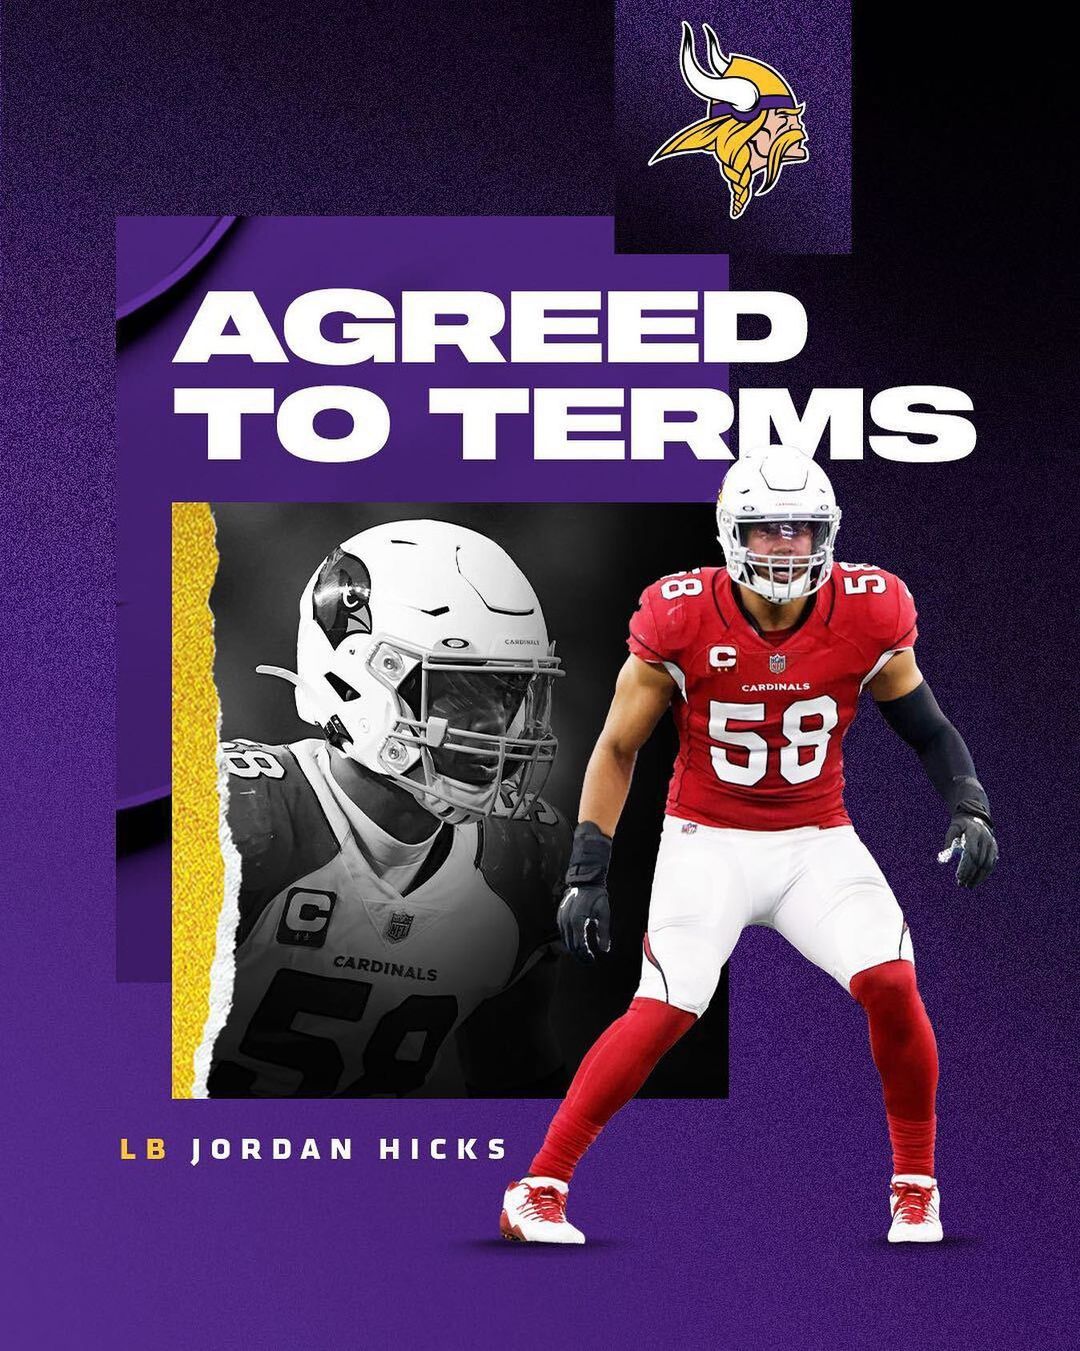 The #Vikings have agreed to terms with LB Jordan Hicks....